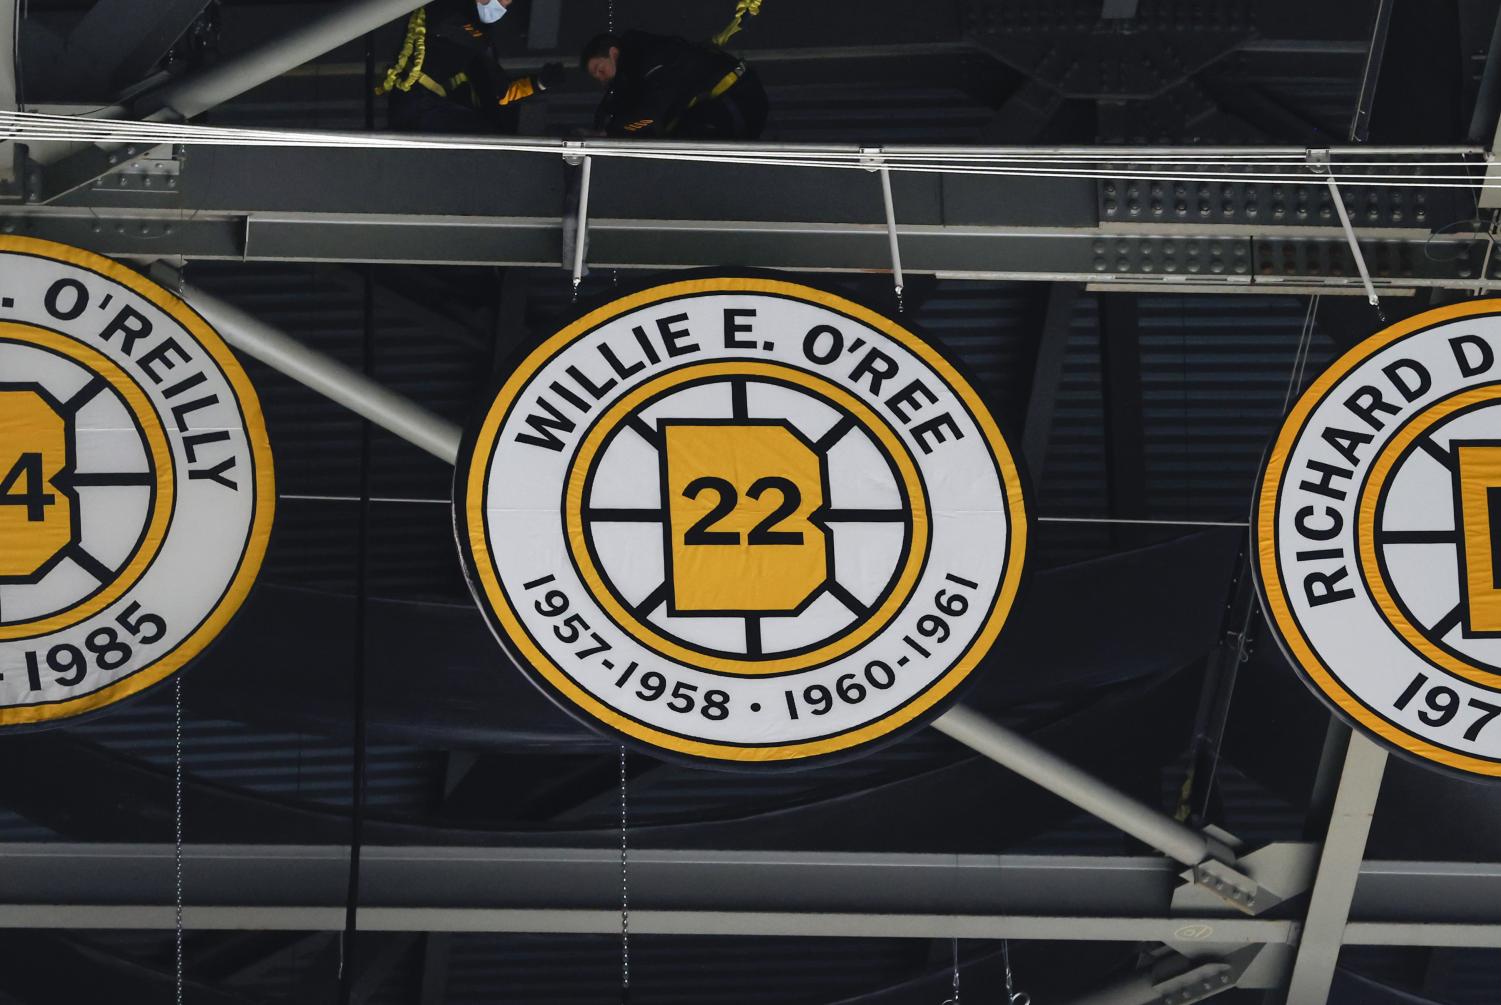 Bruins retire Willie O'Ree's jersey number, honoring first black NHL player